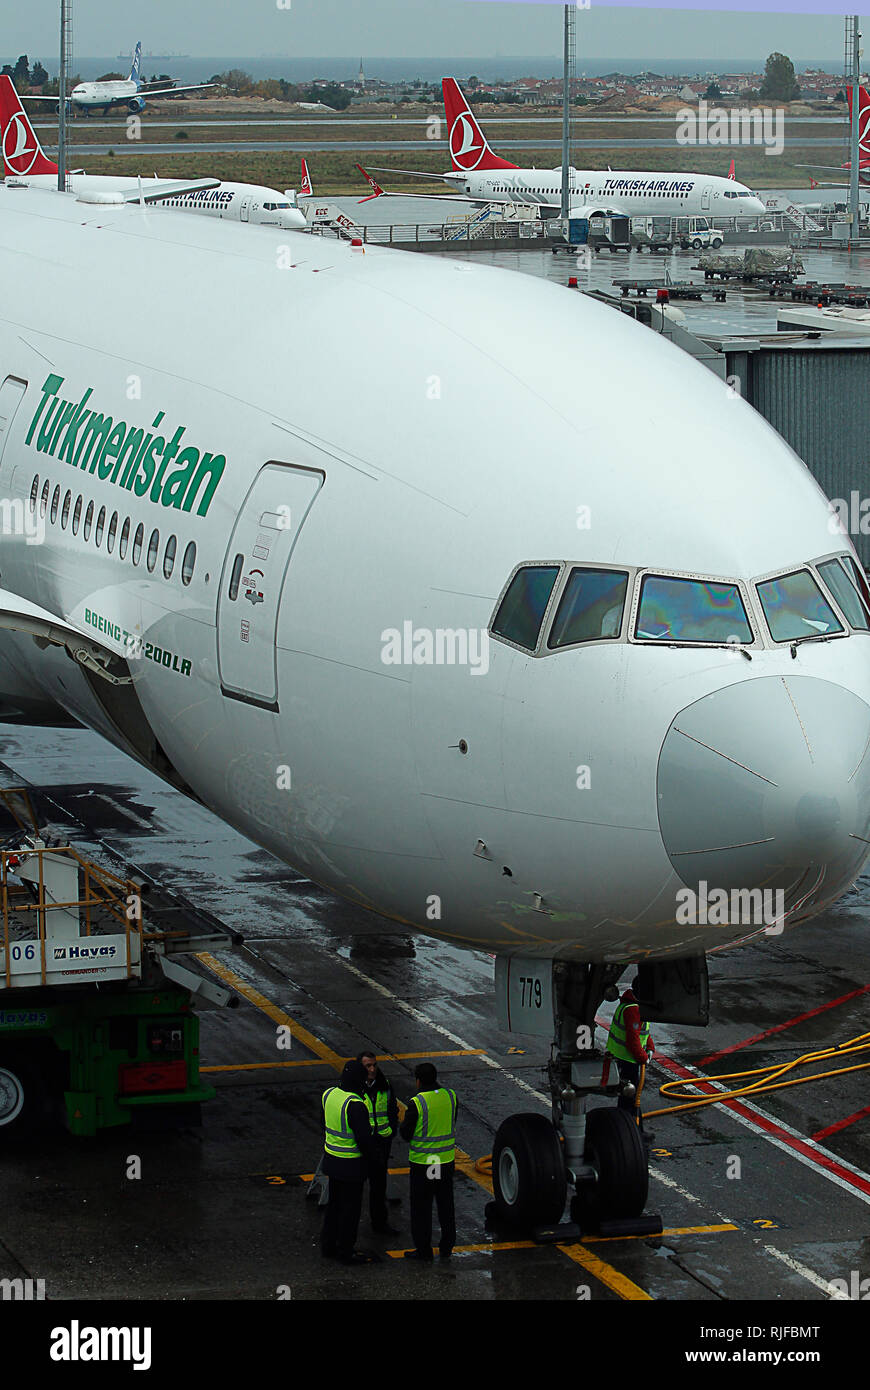 Turkmenistan Airlines Boeing 777 200 LR at Istanbul Ataturk Airport, November 28, 2018 Stock Photo